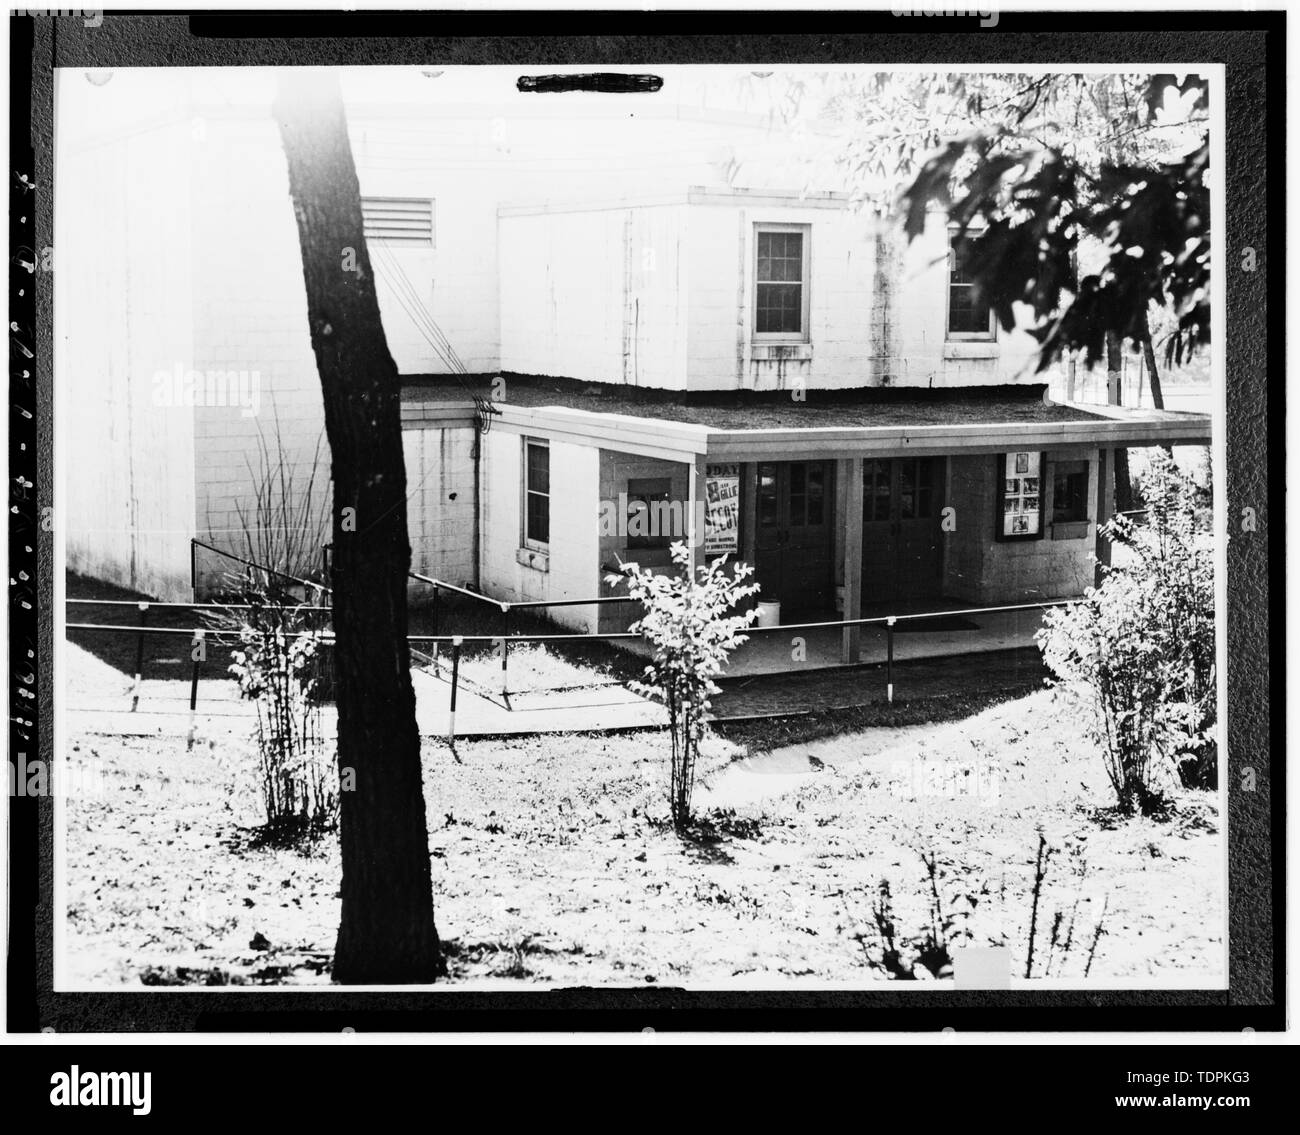 ca. 1944 (original print on file at U.S. Army Intelligence Security Command, Fort Belvoir, Virginia). VIEW TO SOUTH. - Arlington Hall Station, Building No. 102, 4000 Arlington Boulevard, Arlington, Arlington County, VA; Van Dyke, Tina, transmitter Stock Photo